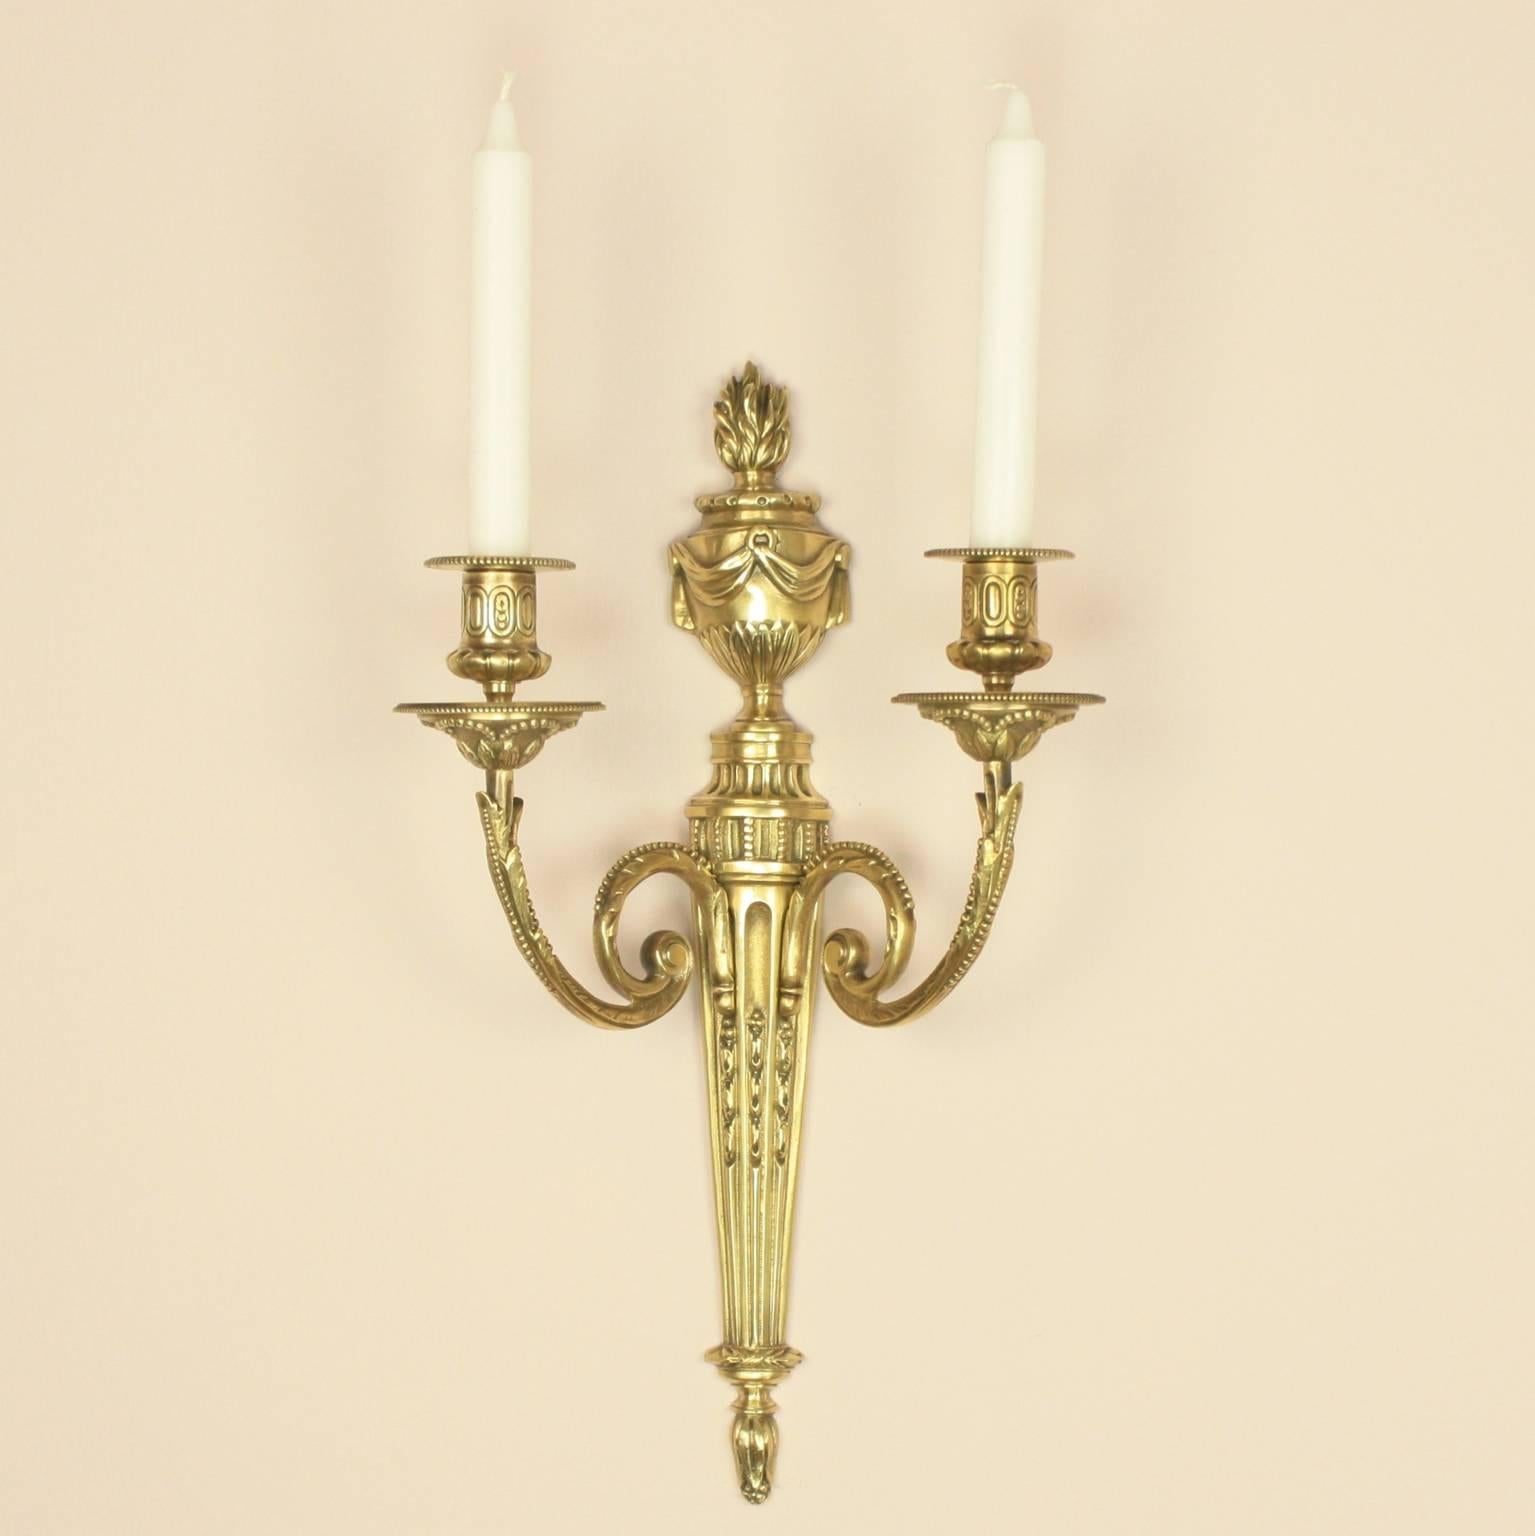 A pair of 19th century bronze wall-lights, each with a fluted back plate surmounted by a swagged flaming classical urn, with two scrolled candle arms cast with leaves and beading and foliate cast drip-pans with corresponding nozzles, the fluted